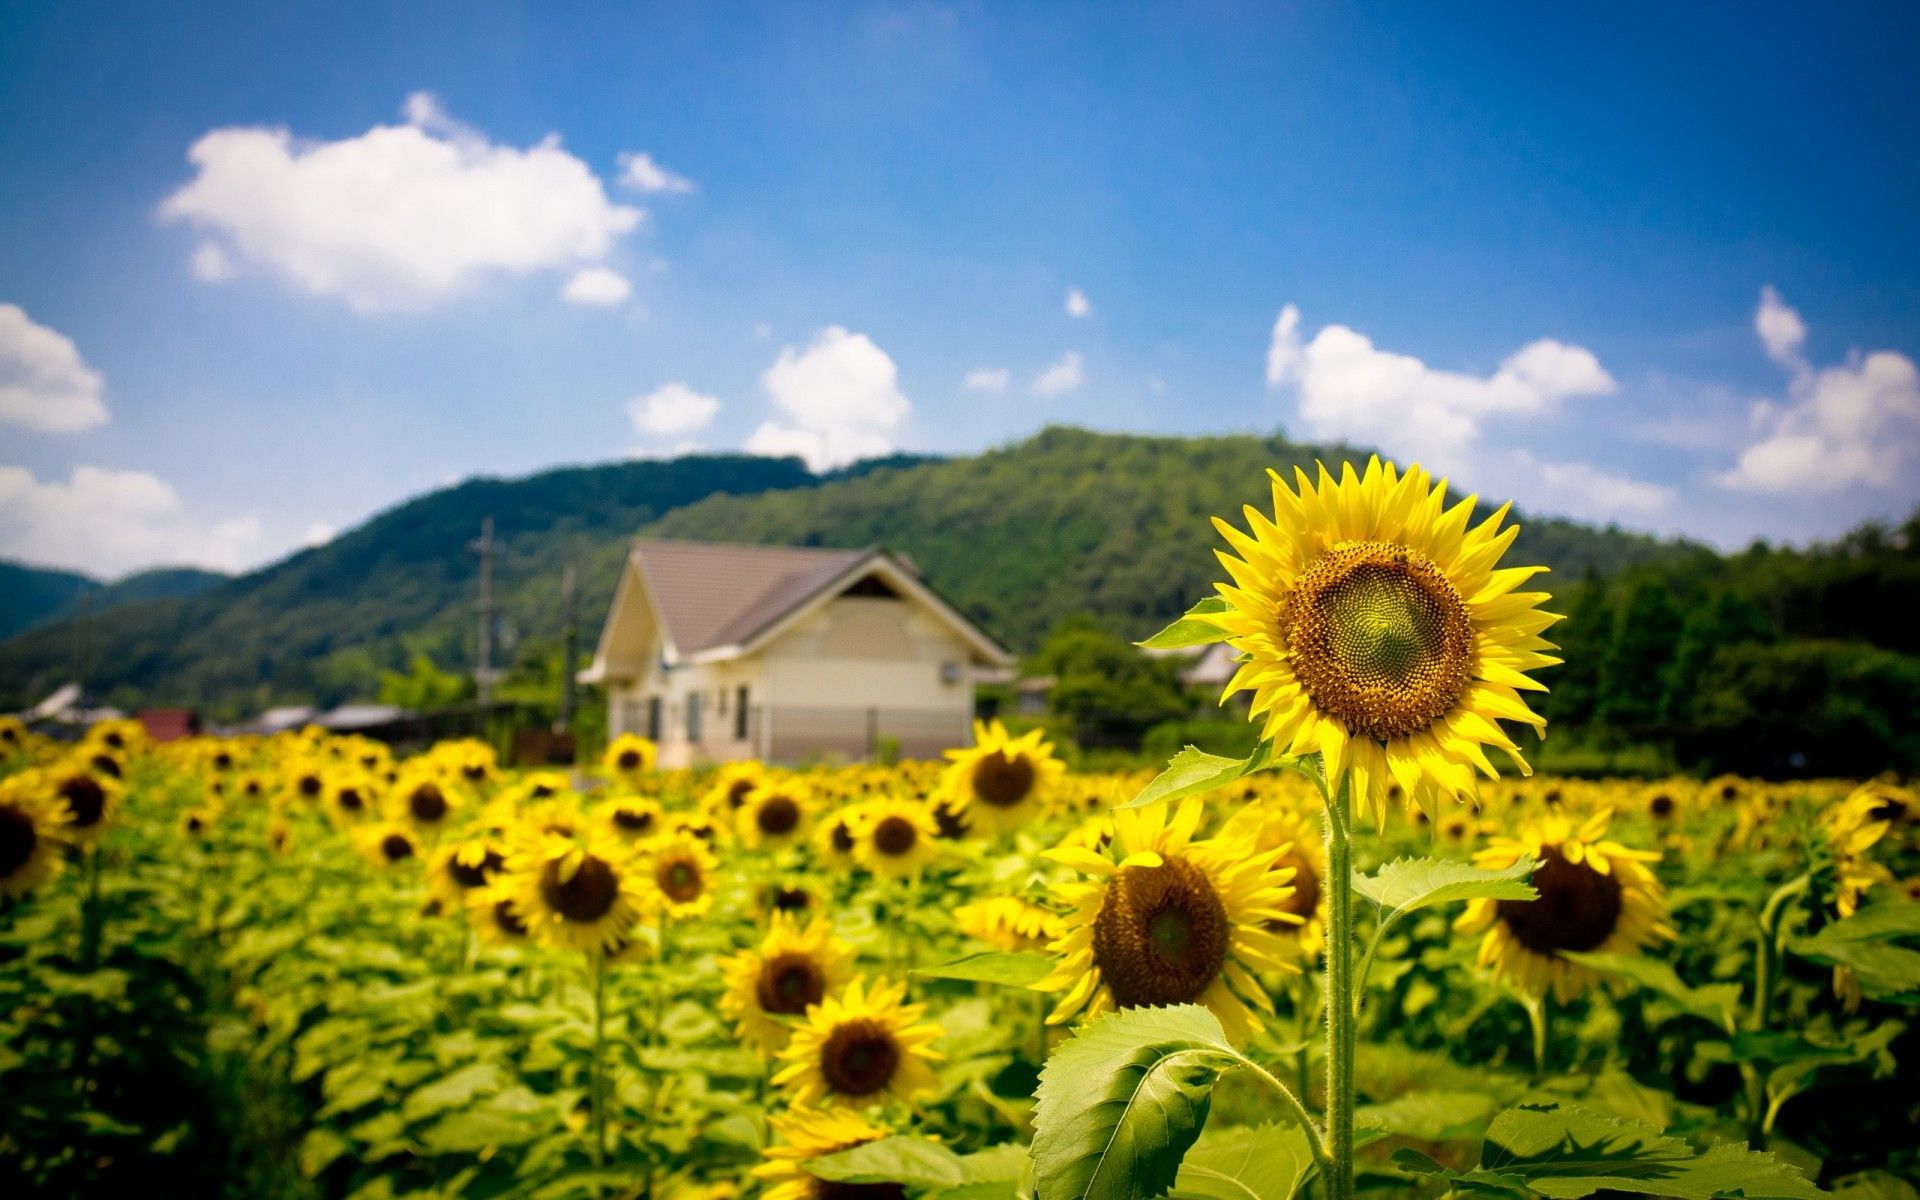 Flower, Landscapes, Mobile Wallpaper, House, Natural, sunflowers, Summer, Hills, Leaf, Wallpaper, Floral, Buildings, Architecture, Field, Yellow, free, Nature 1920x1200. Full HD Wallpaper